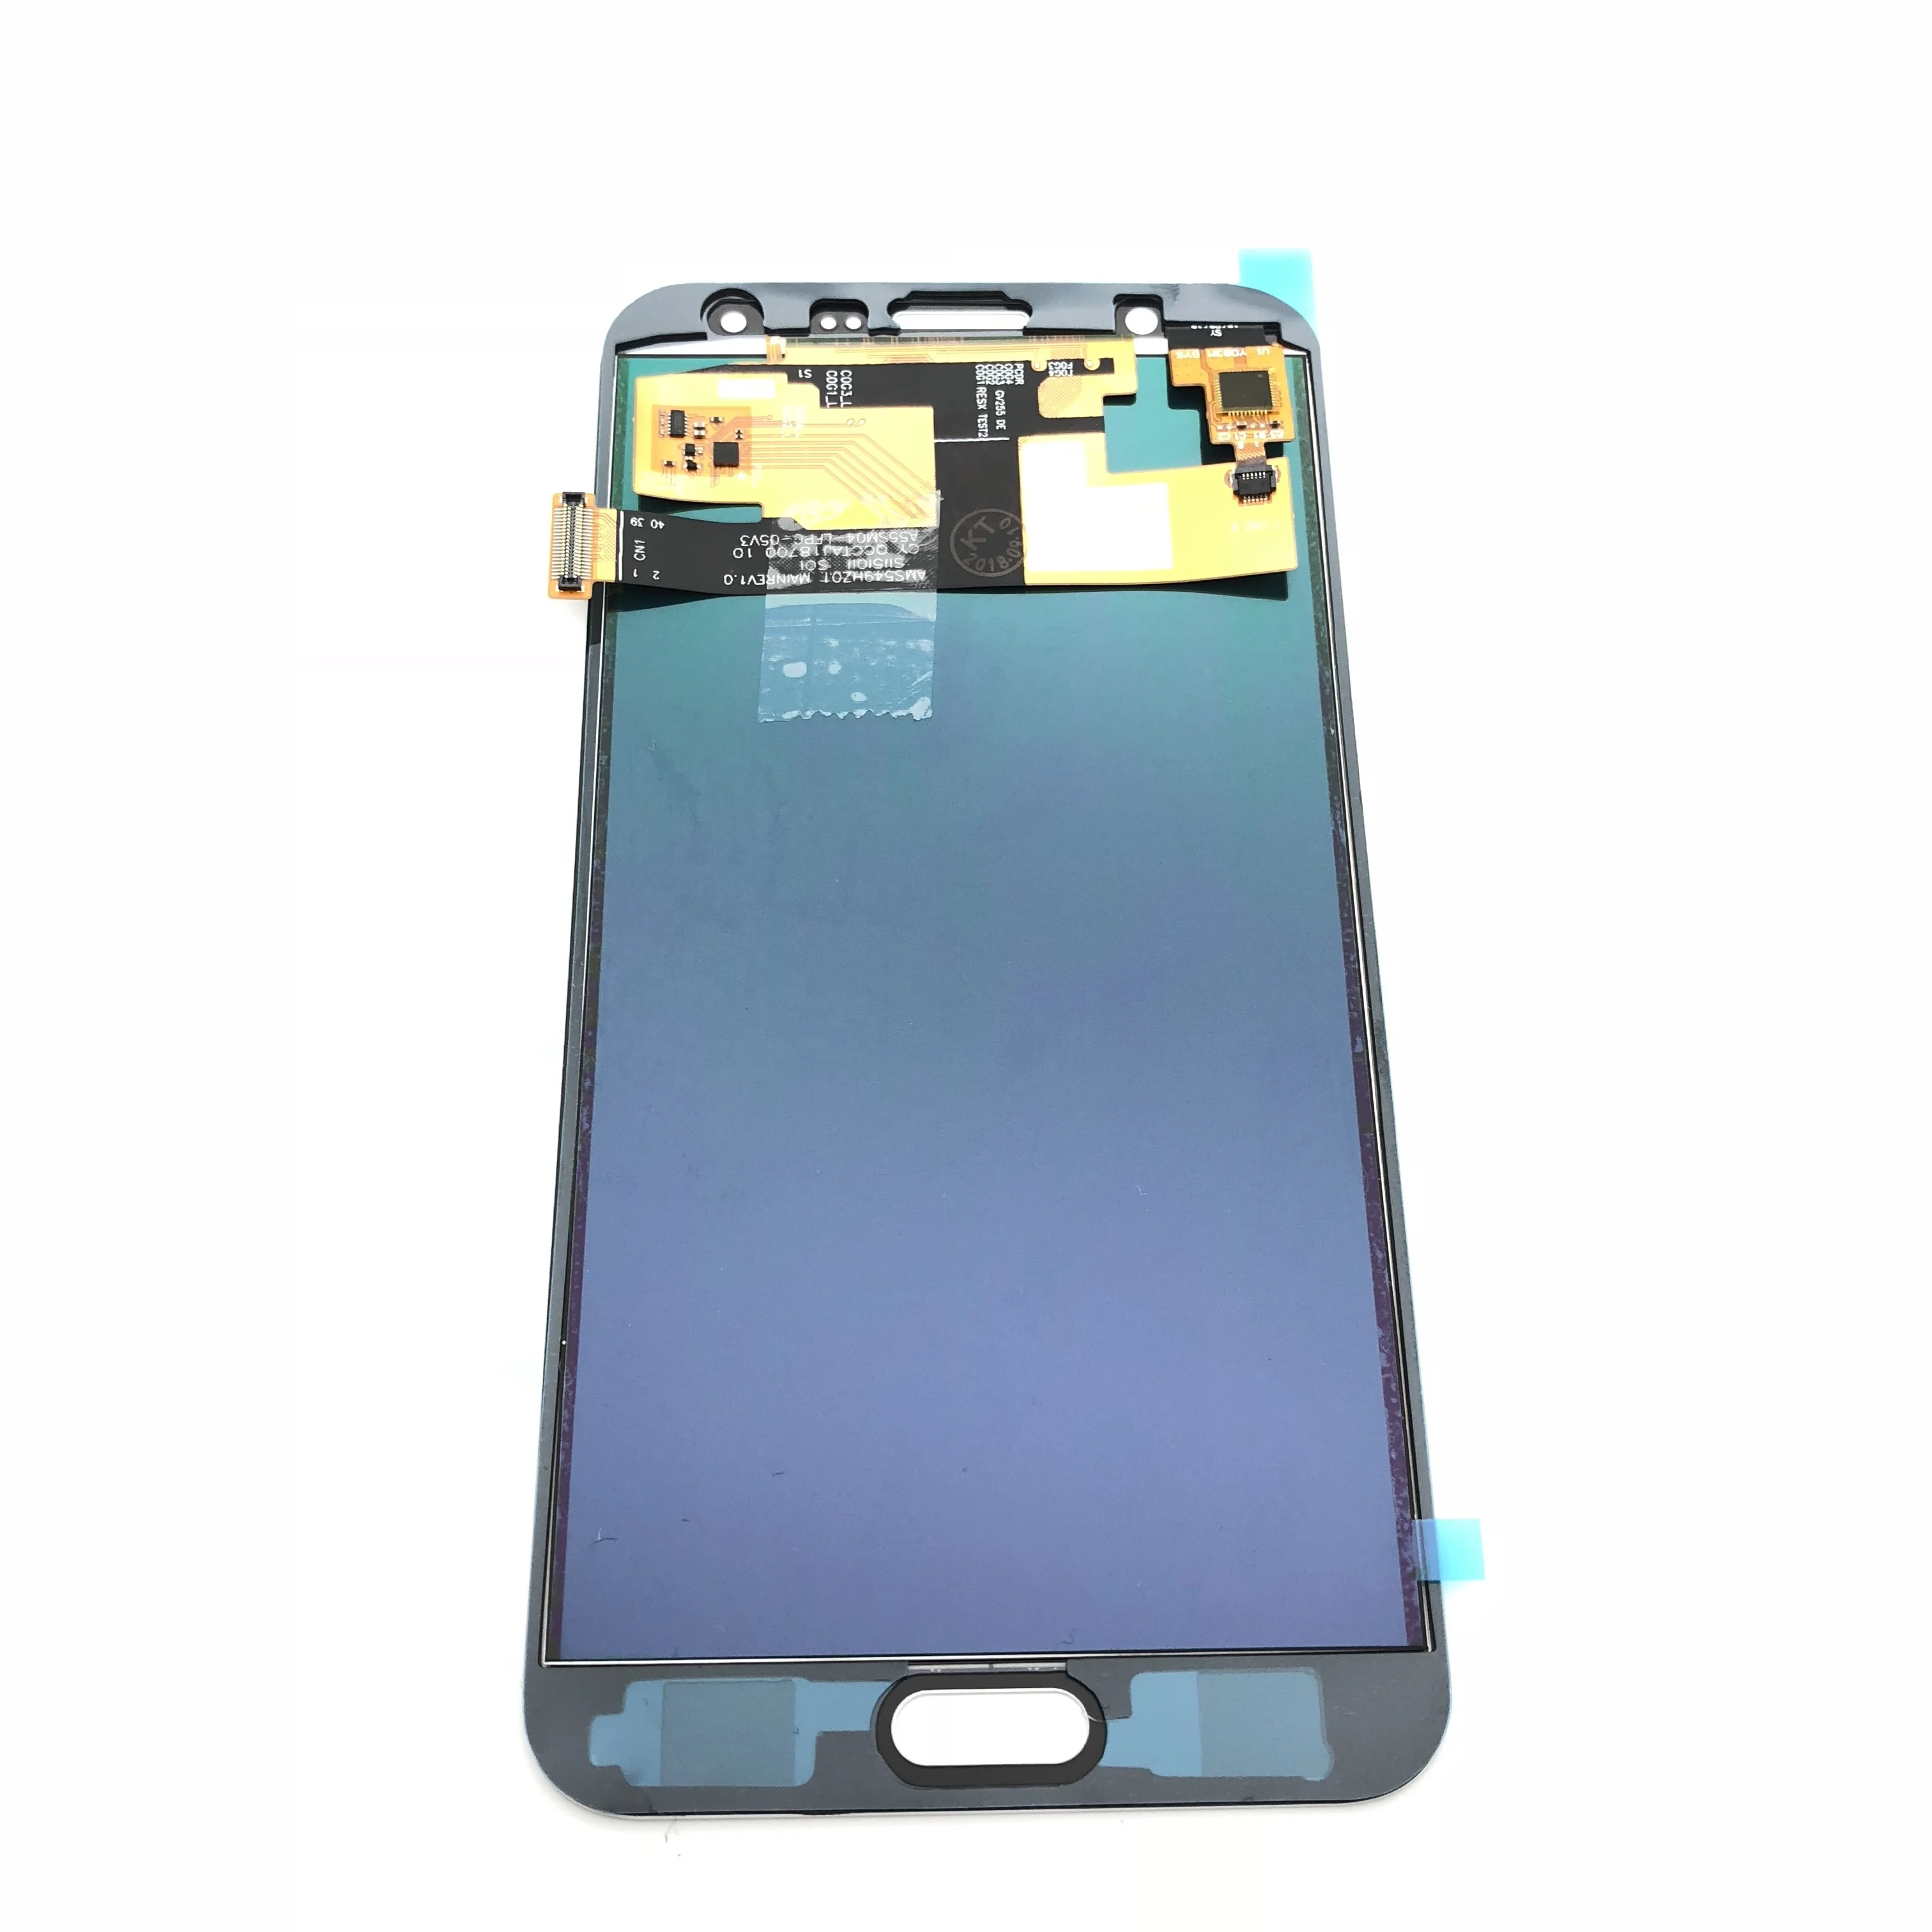 Lcd Screen For Samsung J3 J5 J7 17 Lcd Replacement For Samsung Galaxy J7 15 J700 Lcd Touch Screen Buy Lcd For Samsung J700 Display For Samsung J3 Replacement For Samsung J5 Product On